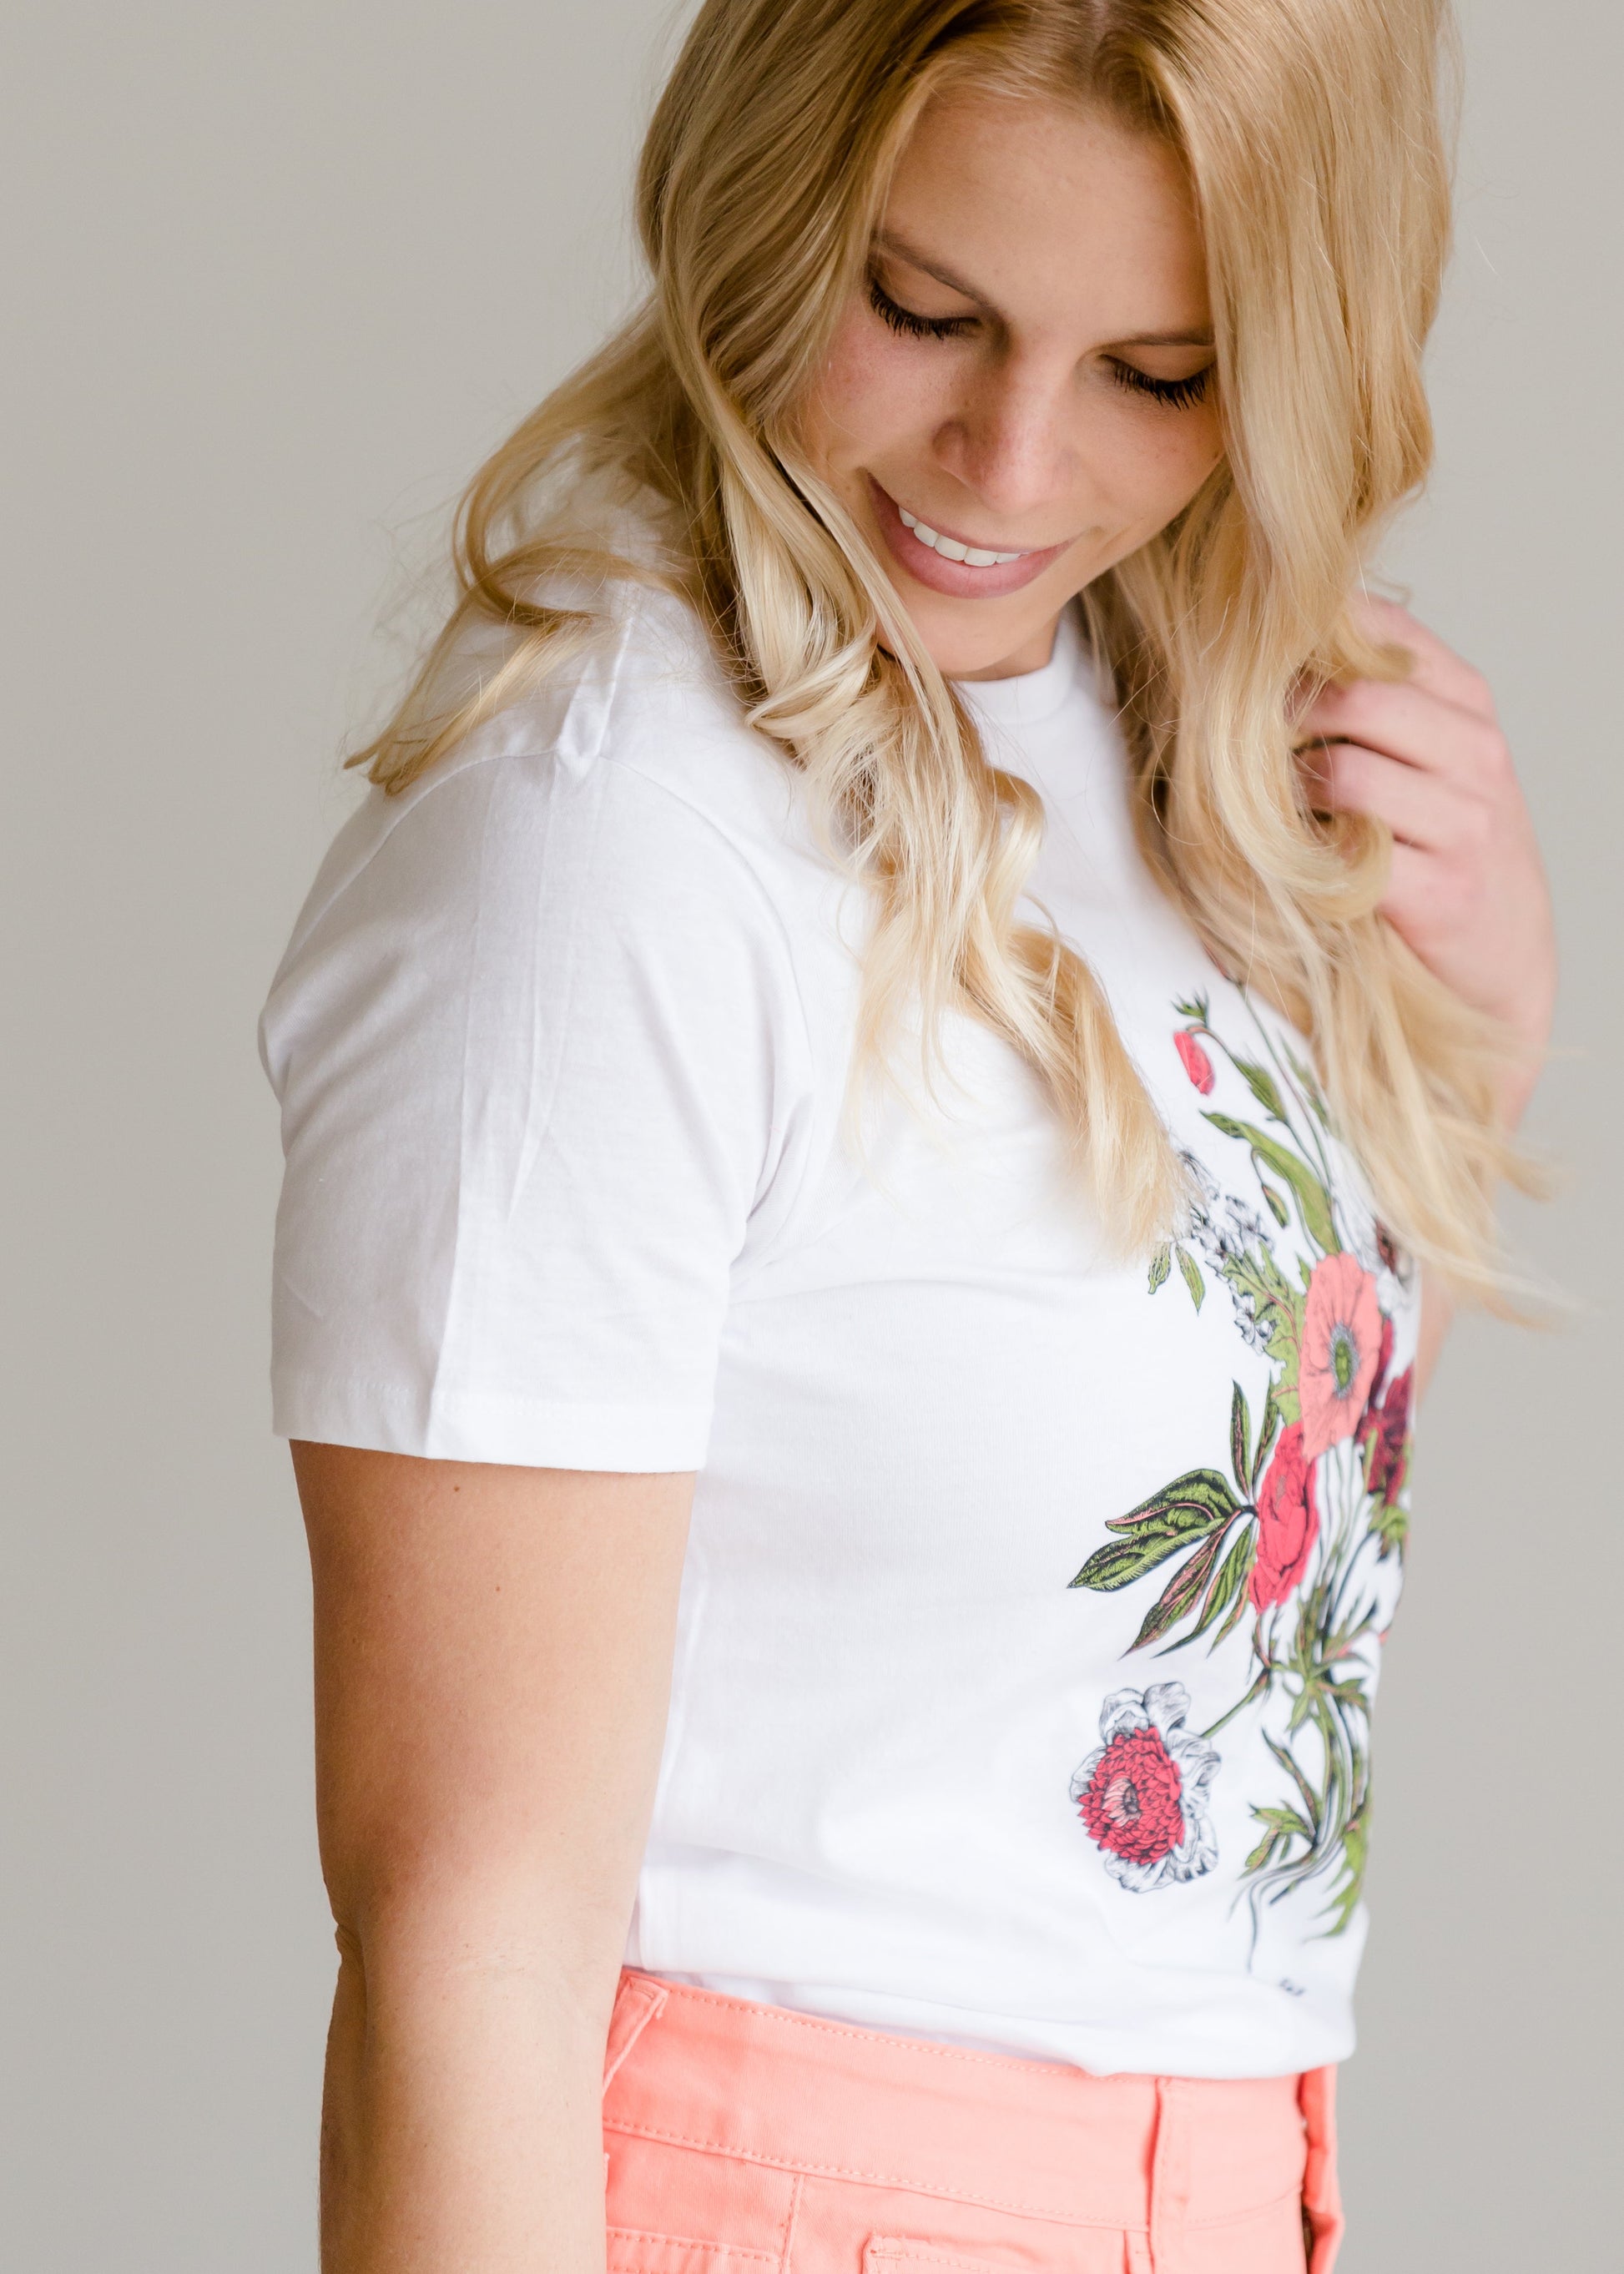 Floral Graphic Short Sleeve Tee Tops